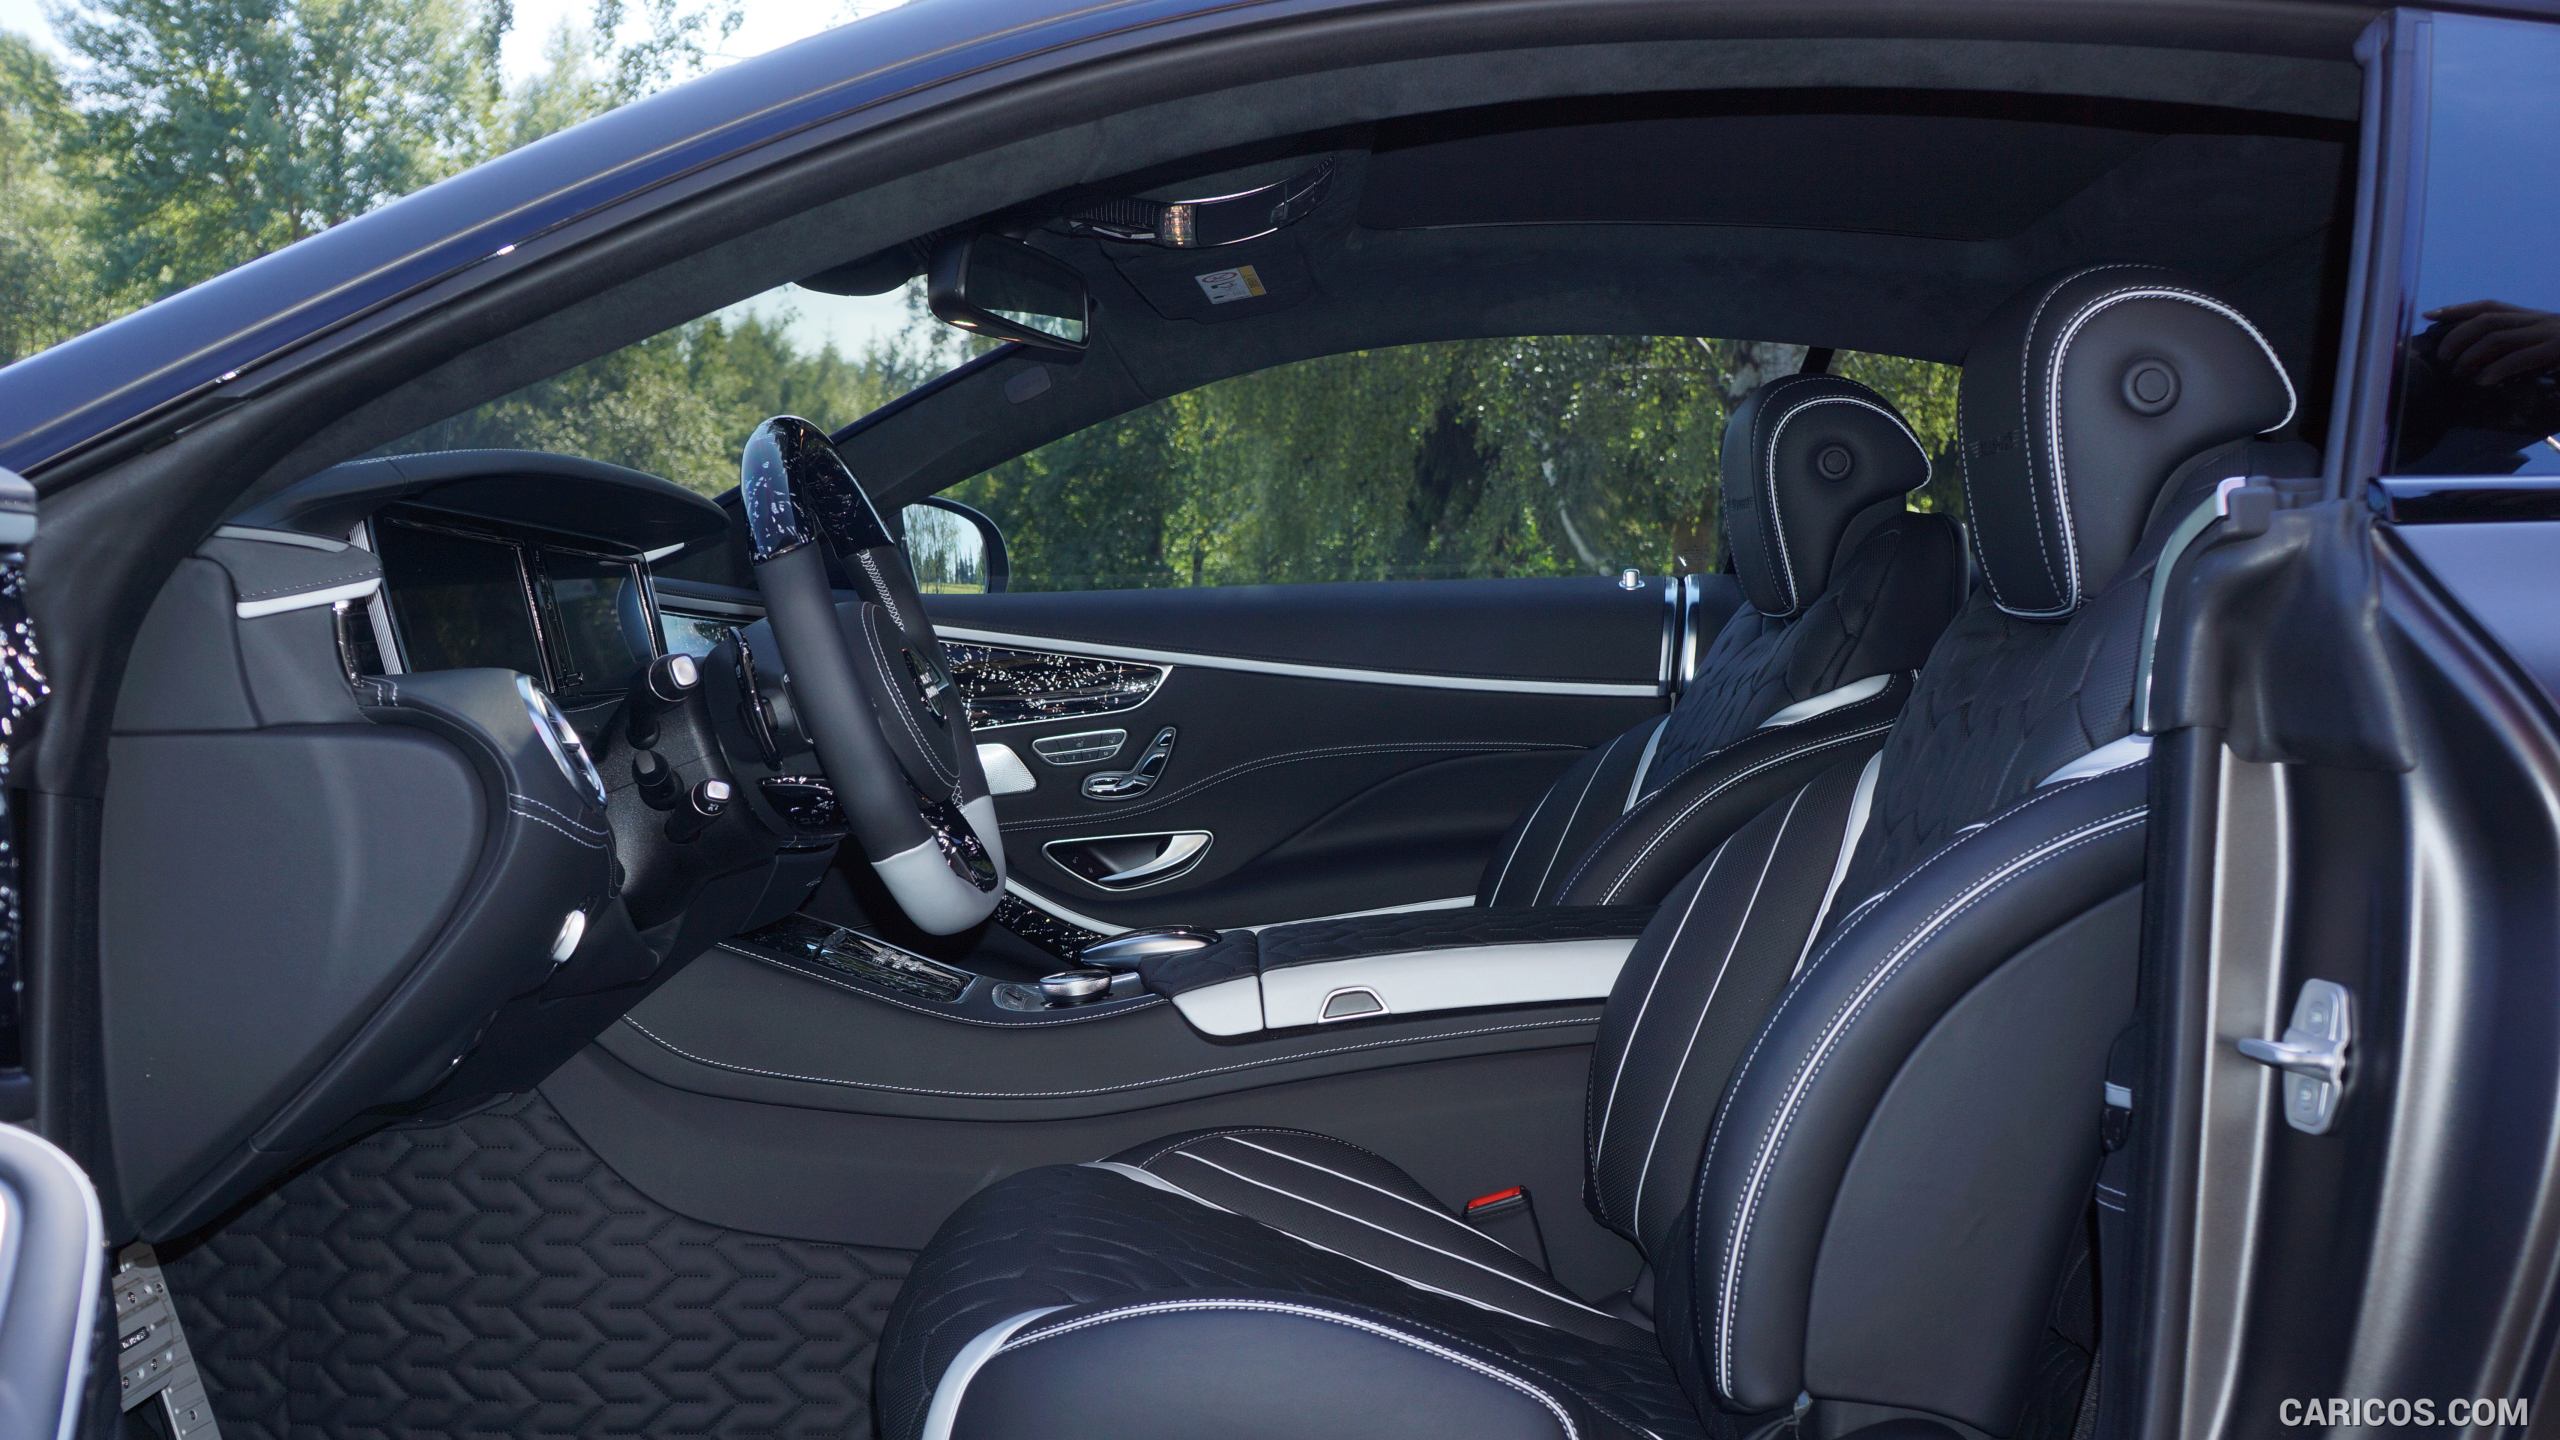 2015 MANSORY Mercedes S63 AMG Coupe Black Edition                 - Interior, #9 of 12